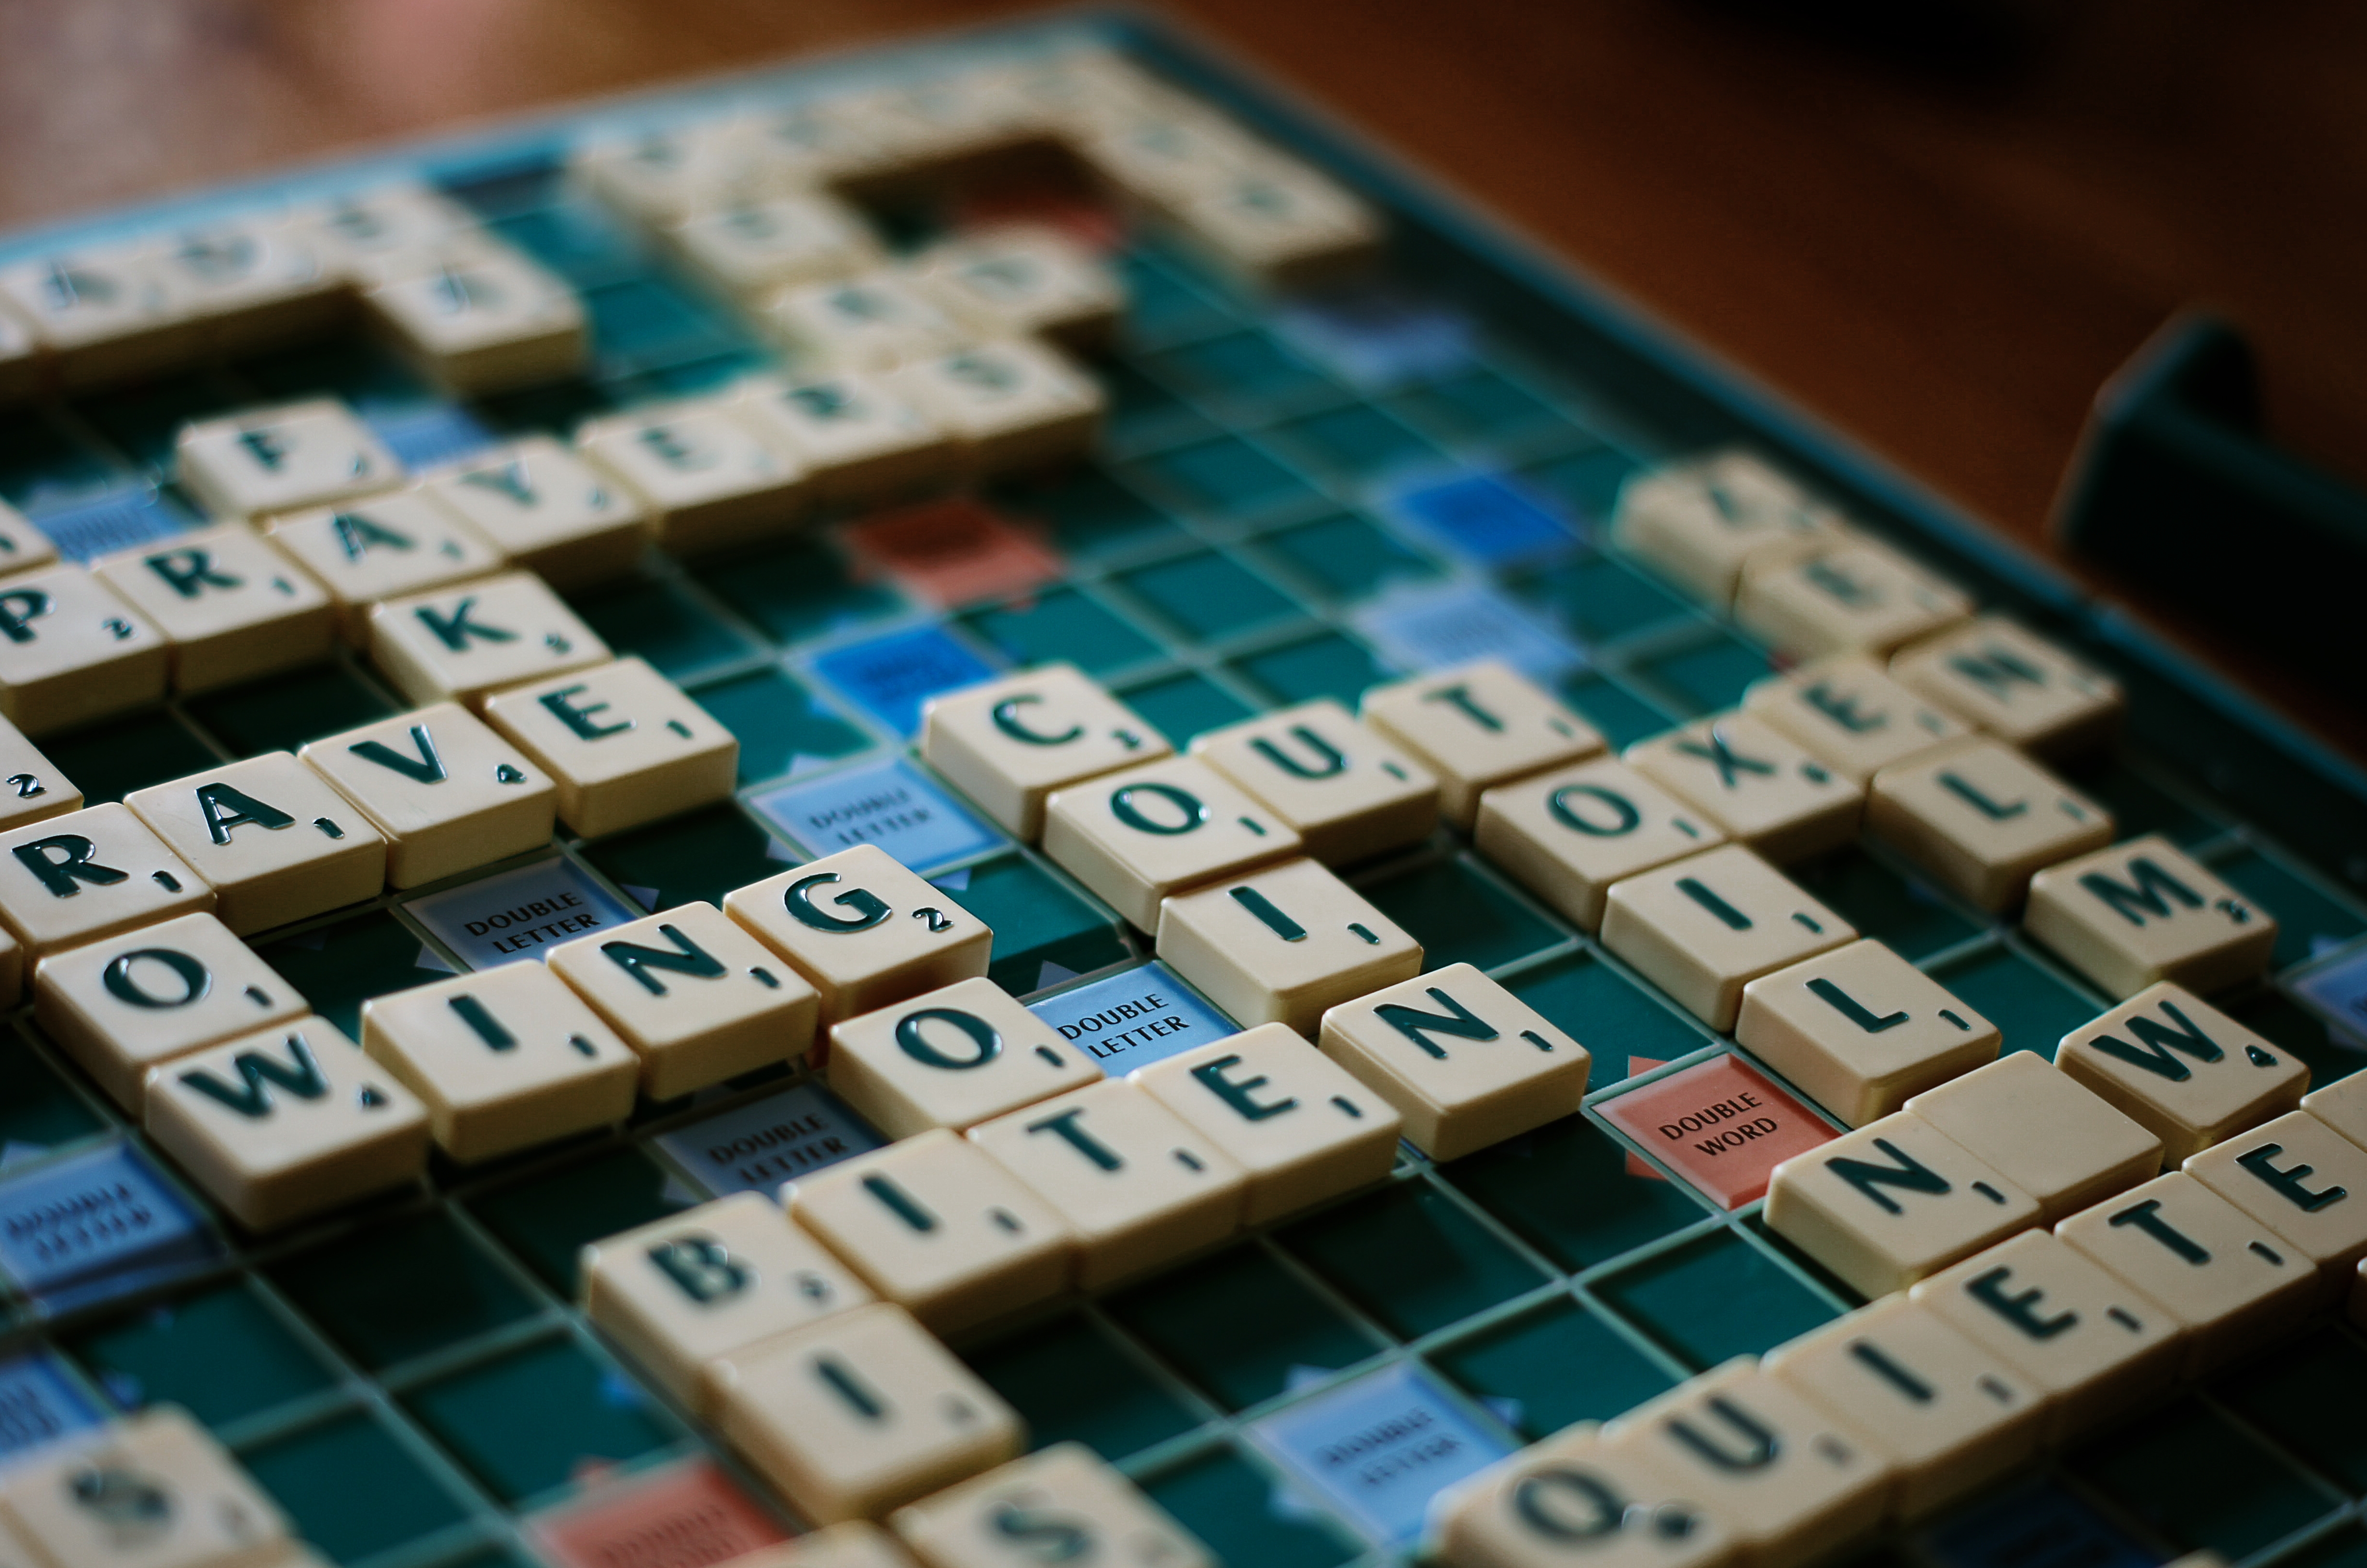 Scrabble board with crossed-out word